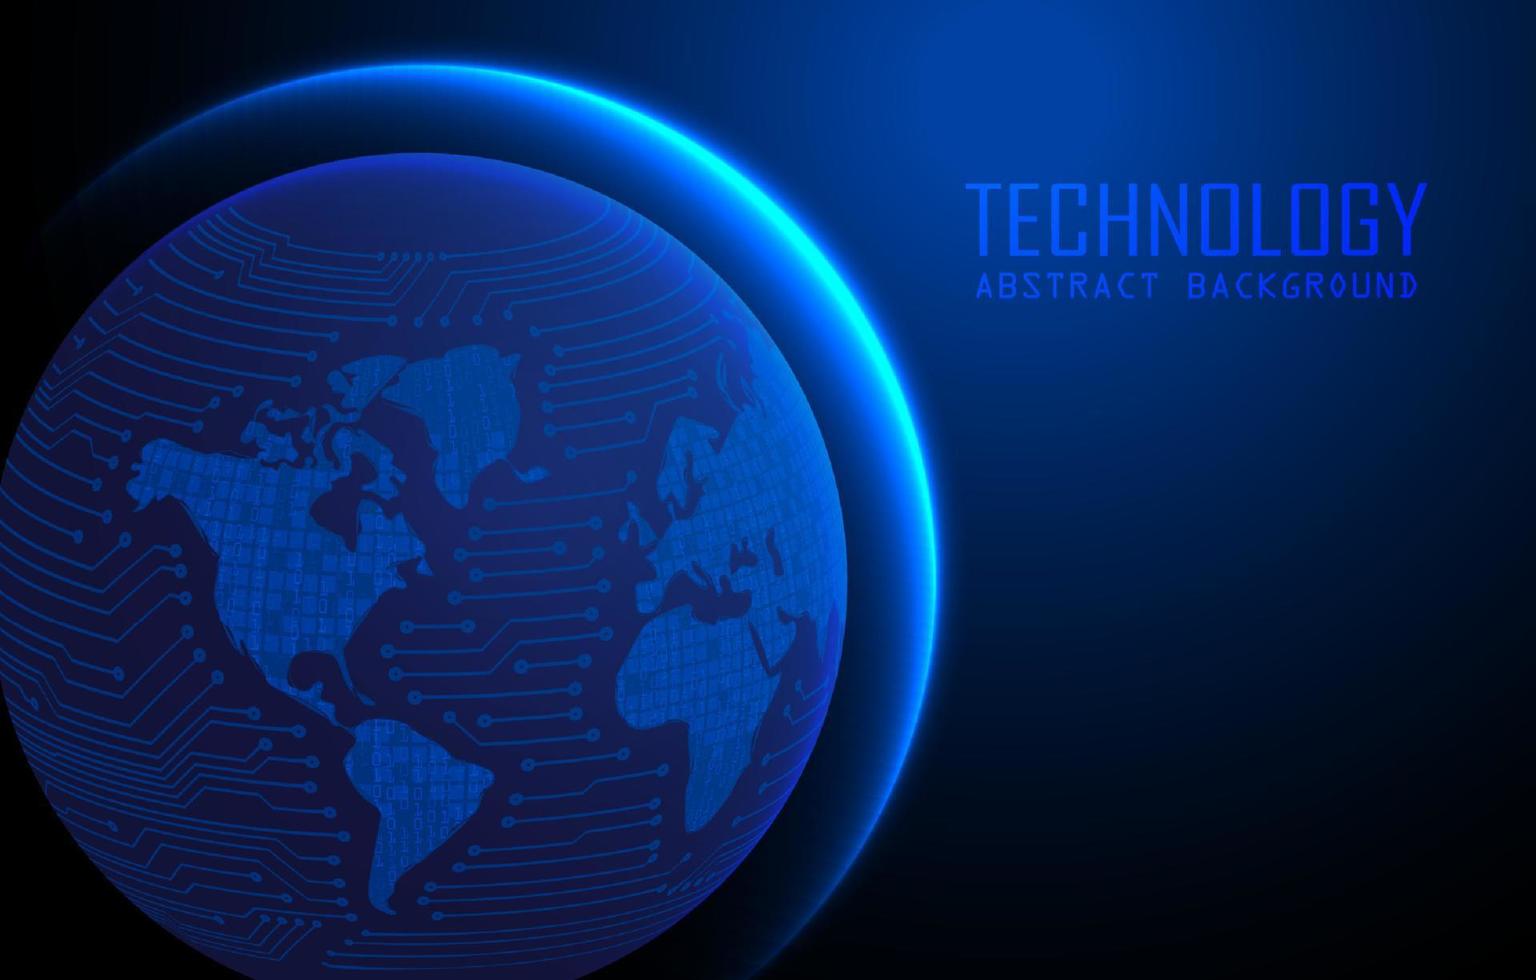 Modern World Map Holograph on Technology Background vector